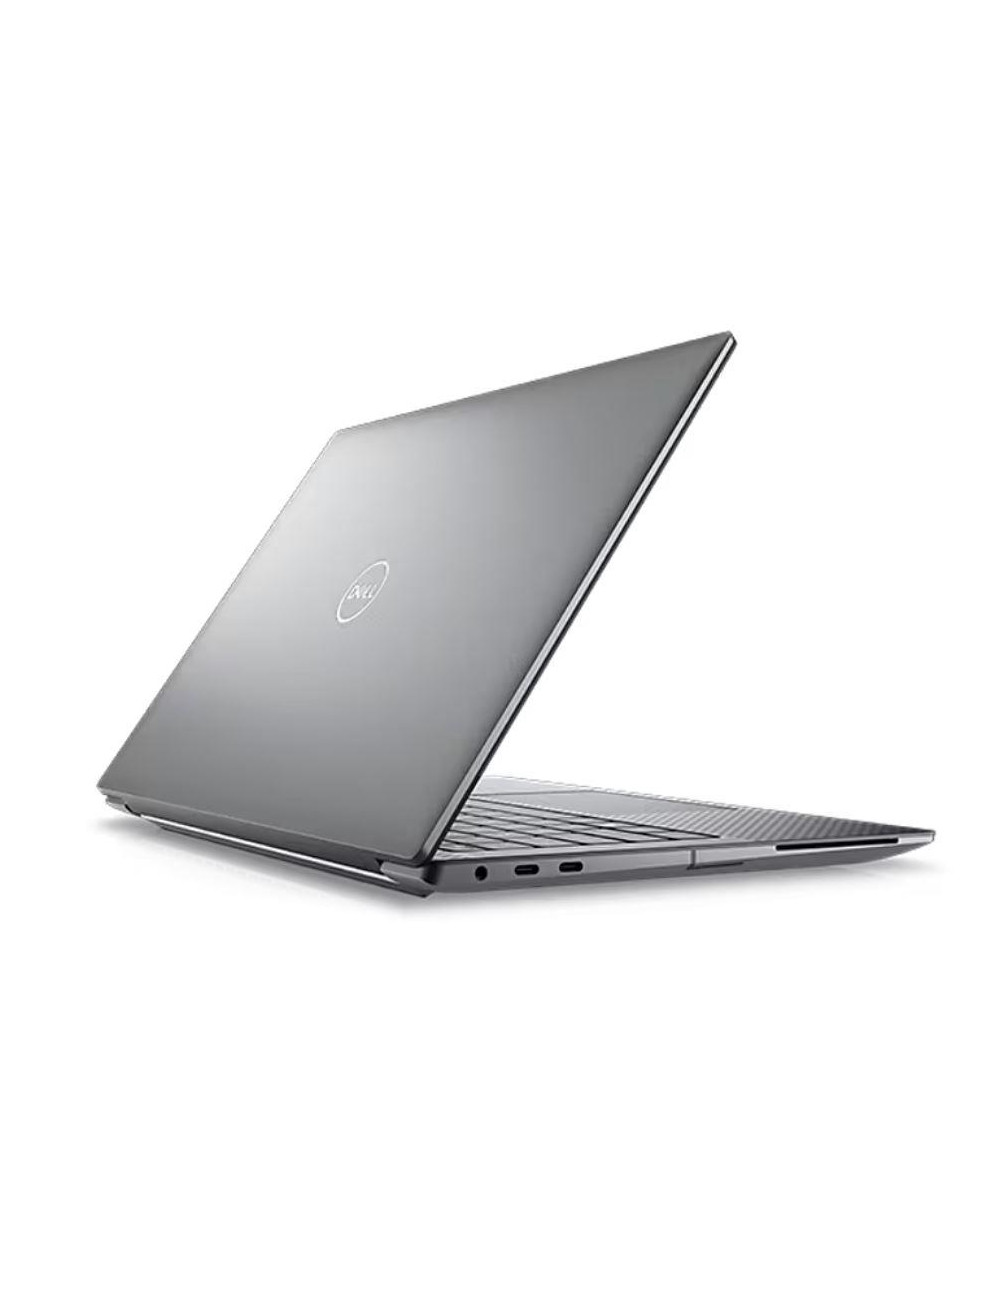 Notebook|DELL|Precision|5480|CPU i7-13700H|2400 MHz|CPU features vPro|14"|1920x1200|RAM 16GB|DDR5|6400 MHz|SSD 512GB|NVIDIA RTX 